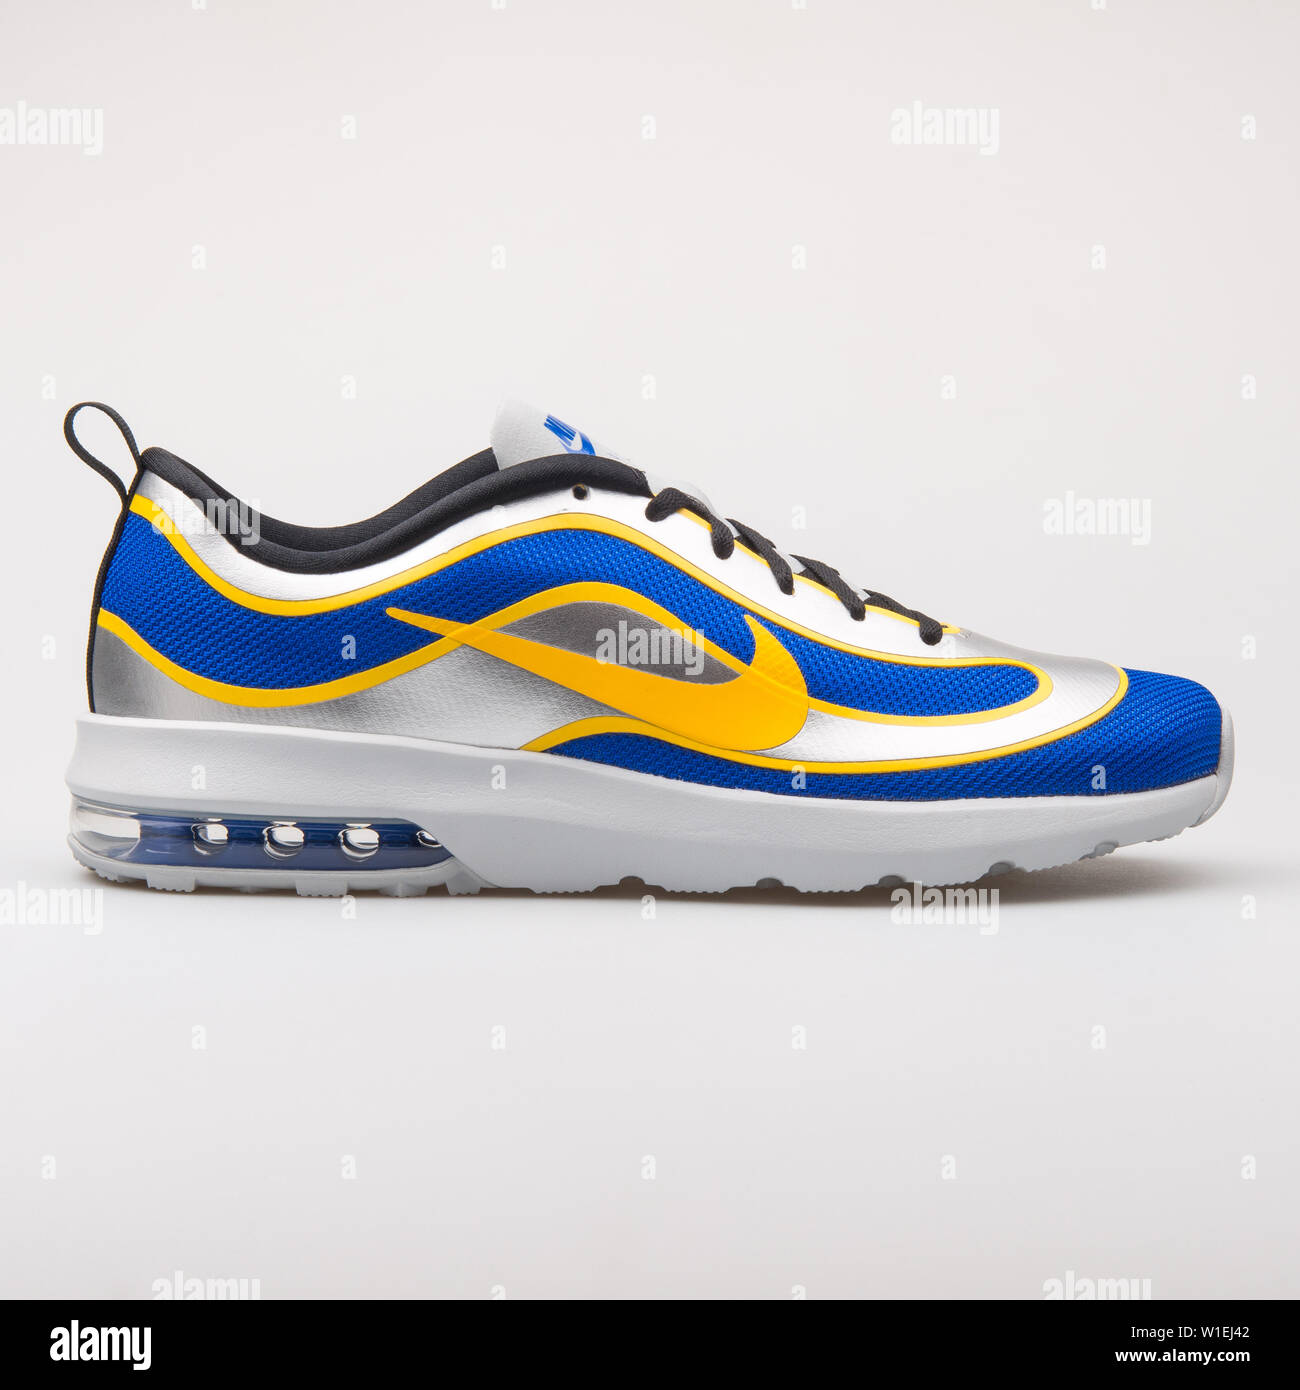 VIENNA, AUSTRIA - AUGUST 23, 2017: Nike Air Max Mercurial 98 QS blue, grey  and yellow sneaker on white background Stock Photo - Alamy